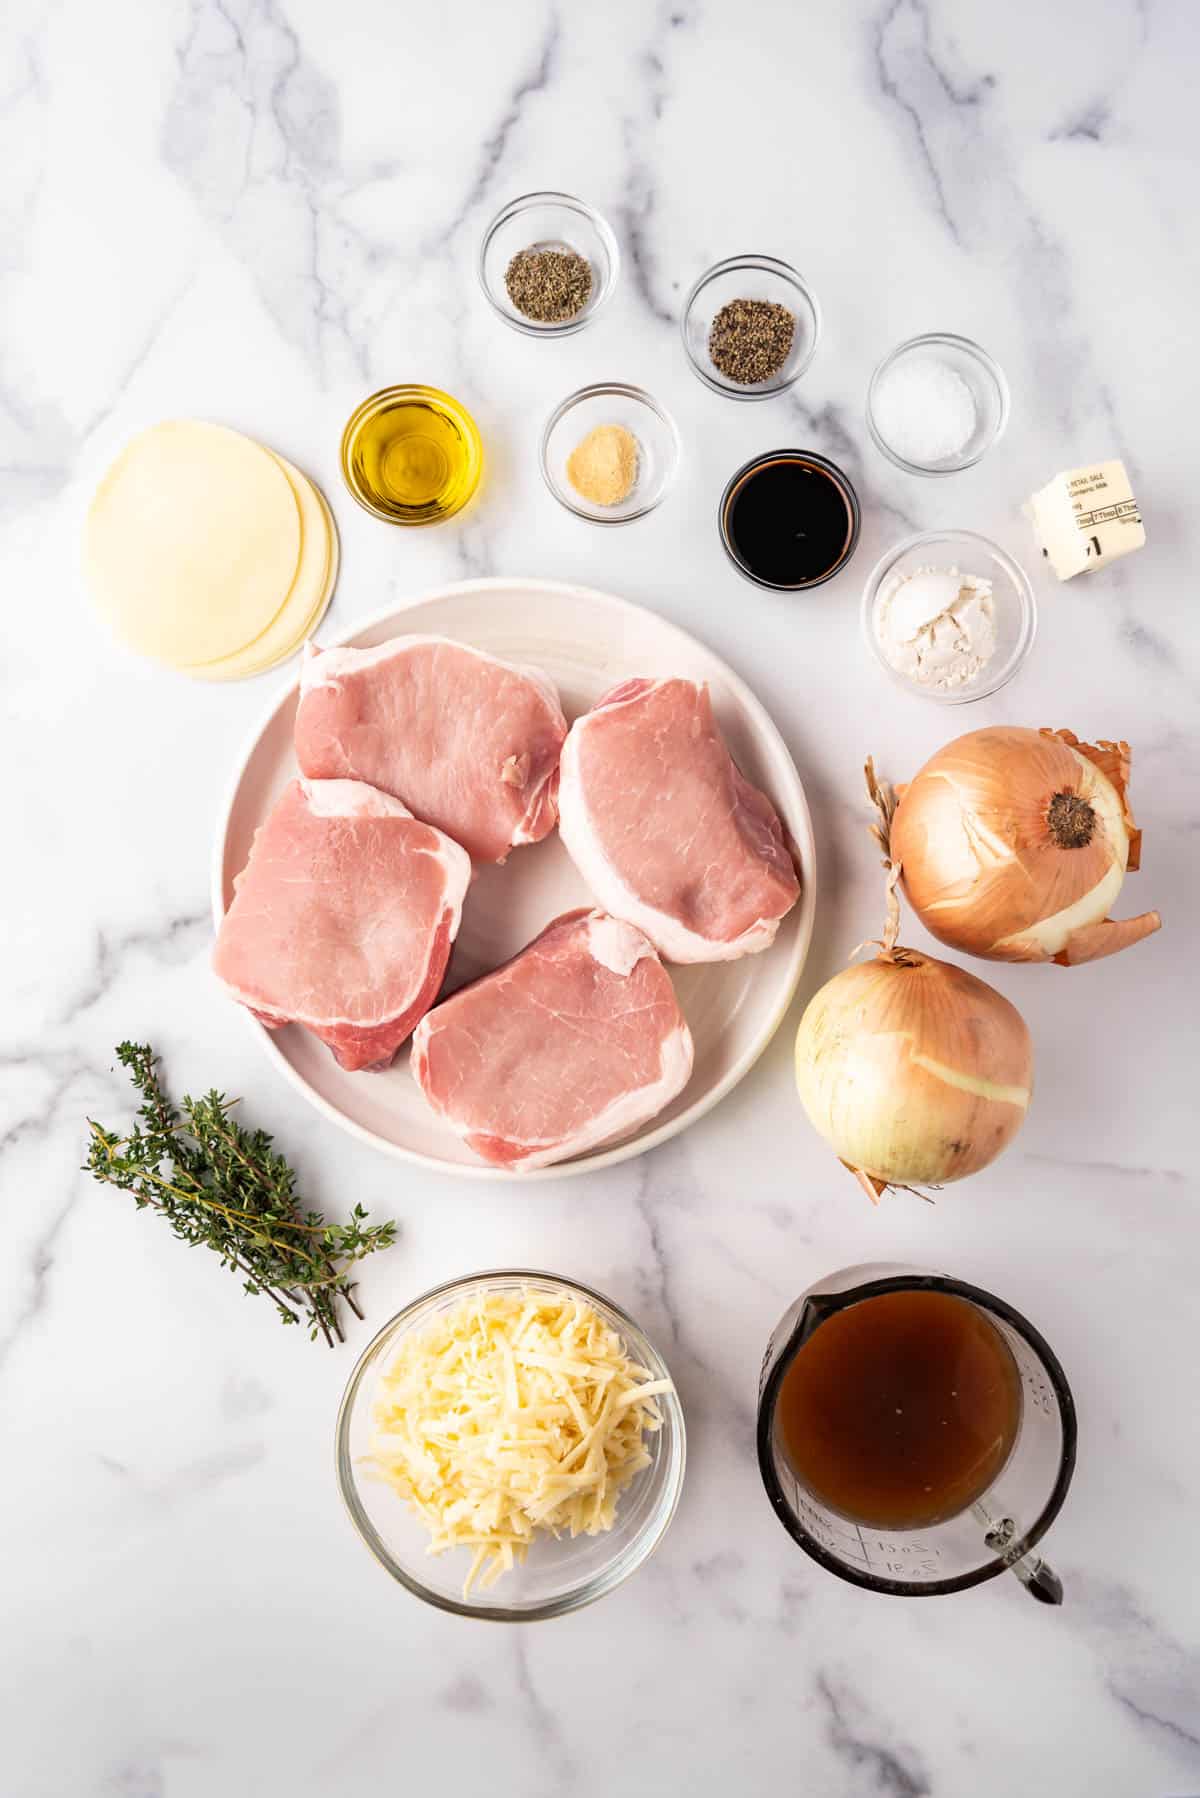 An overhead image of ingredients for making french onion pork chops.